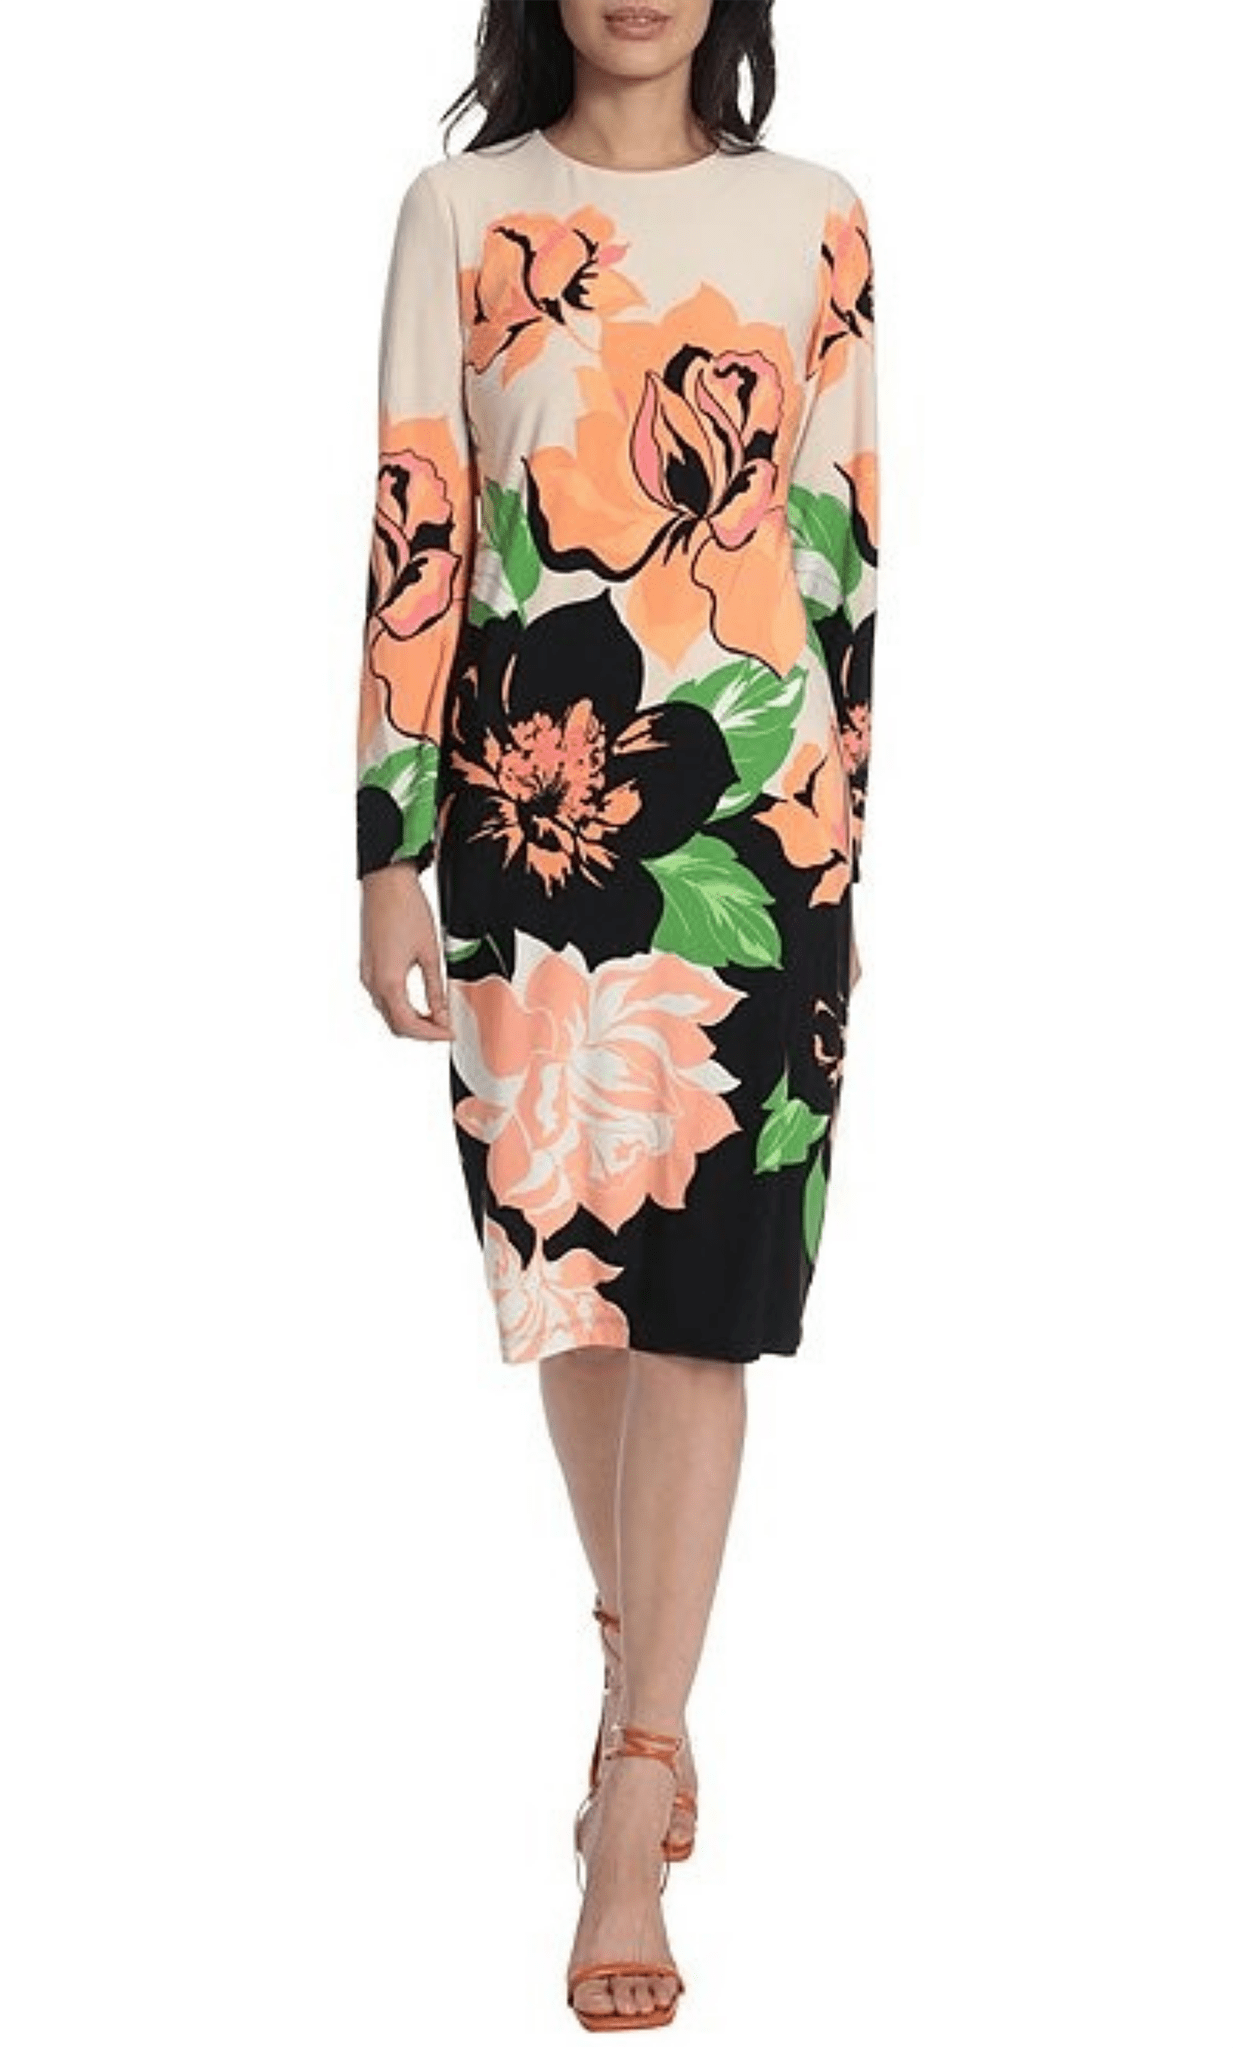 Maggy London G5142M - Floral Long Sleeve Cocktail Dress Special Occasion Dress 0 / Beige Orange